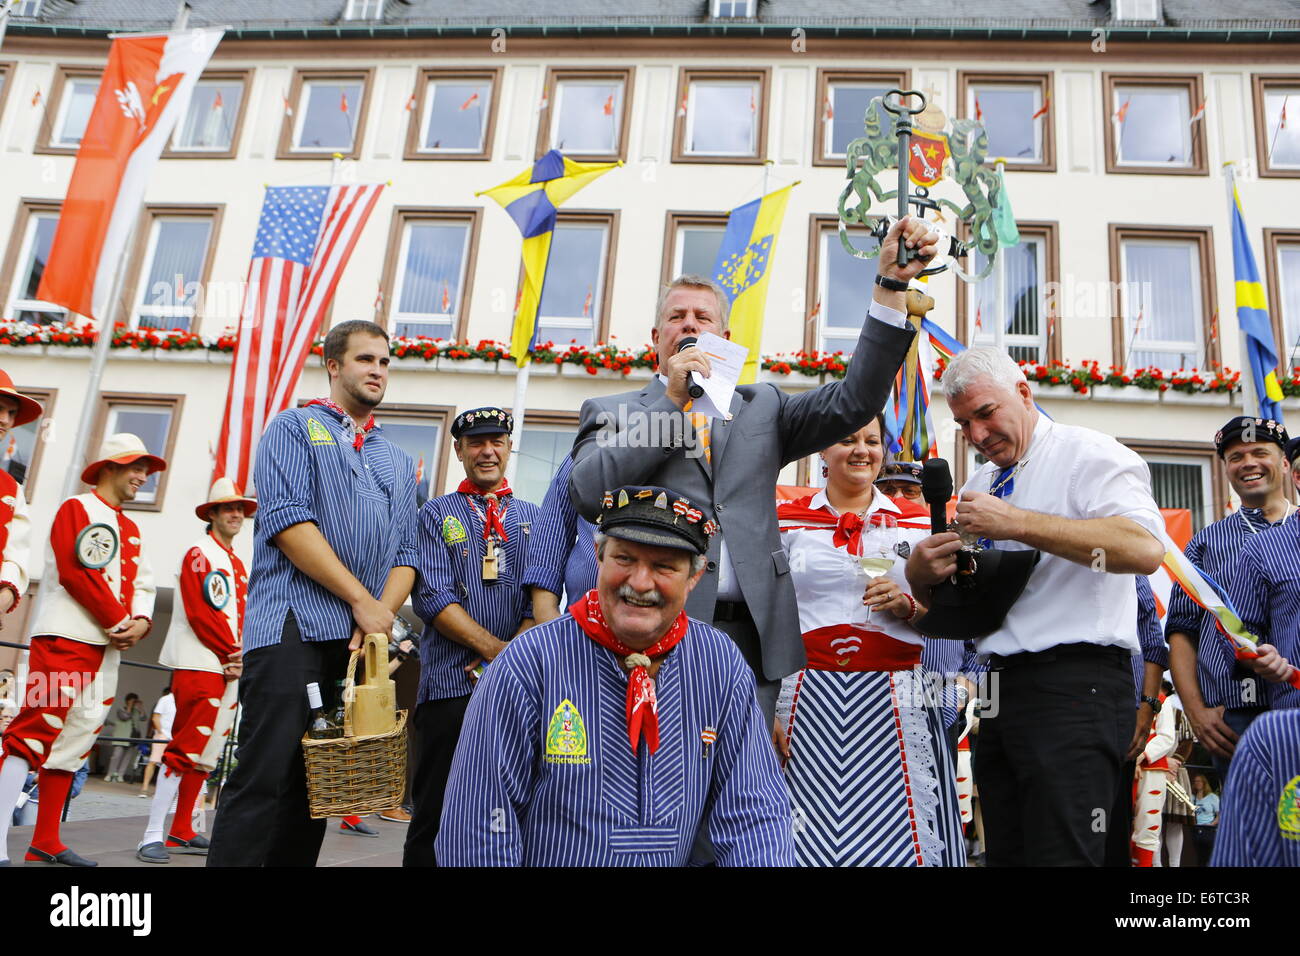 Worms, Germany. 30th August 2014. The Lord Mayor of Worms, Michael Kissel, shows the key to the city. The largest wine fair along the Rhine, the Backfischfest, started in Worms with the traditional handing over of power from the Lord Mayor to the mayor of the fishermenÕs lea. The ceremony included dances and music. Stock Photo